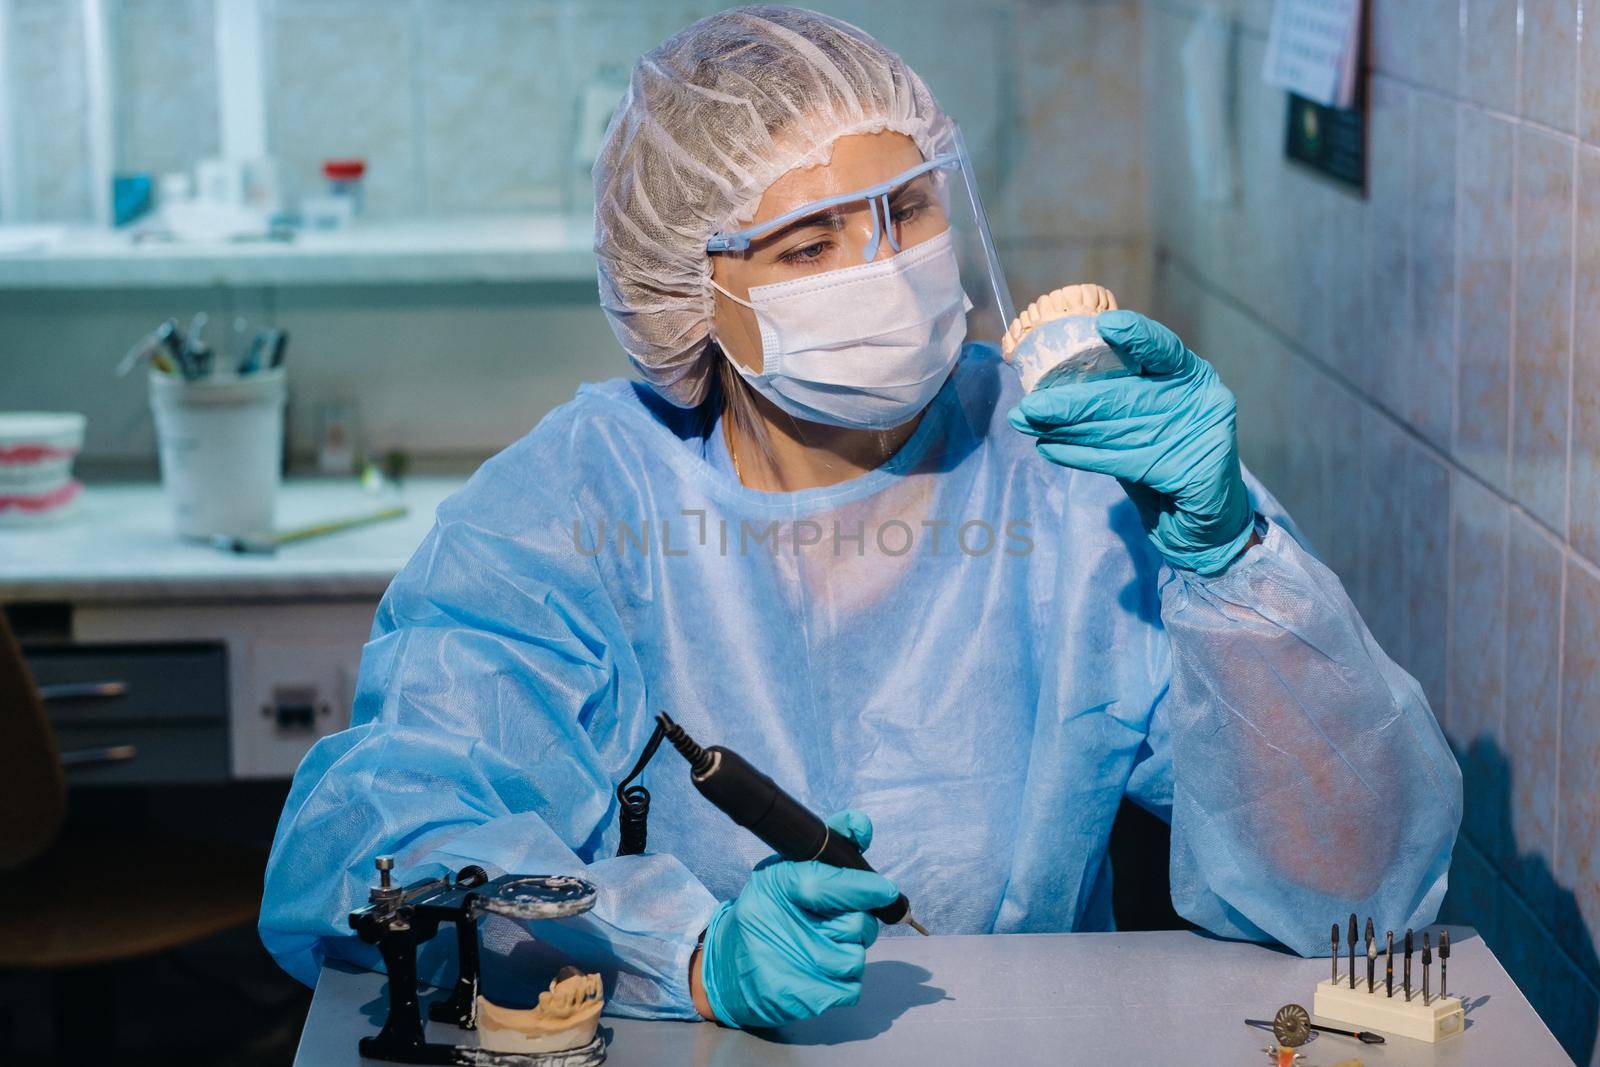 A dental technician in protective clothing is working on a prosthetic tooth in his laboratory.